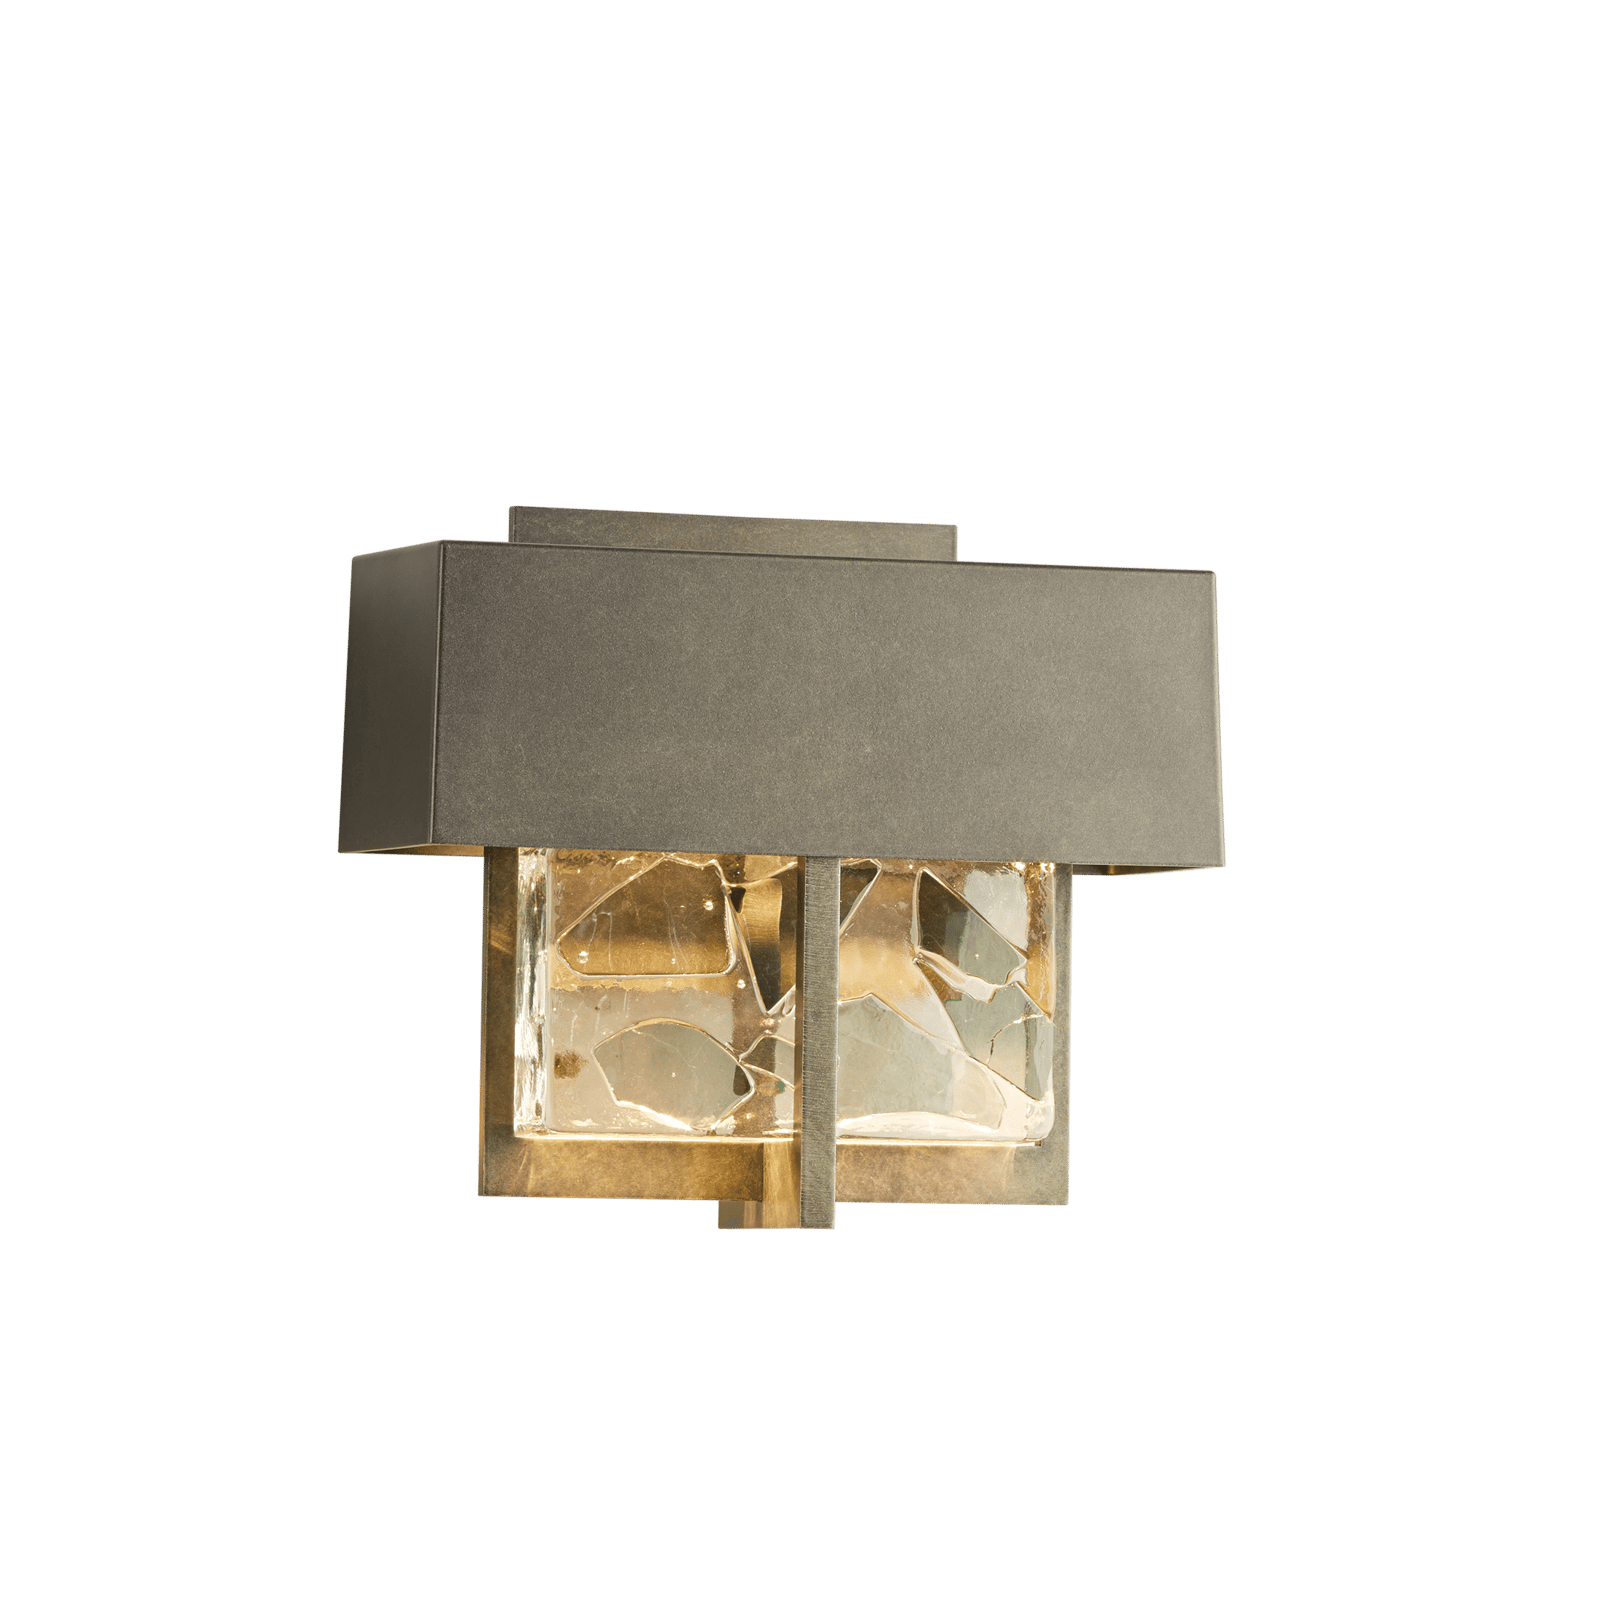 Shard LED Outdoor Sconce Outdoor l Wall Hubbardton Forge Coastal Burnished Steel 8.6x7.1 Clear w/ Shards Glass (YP)